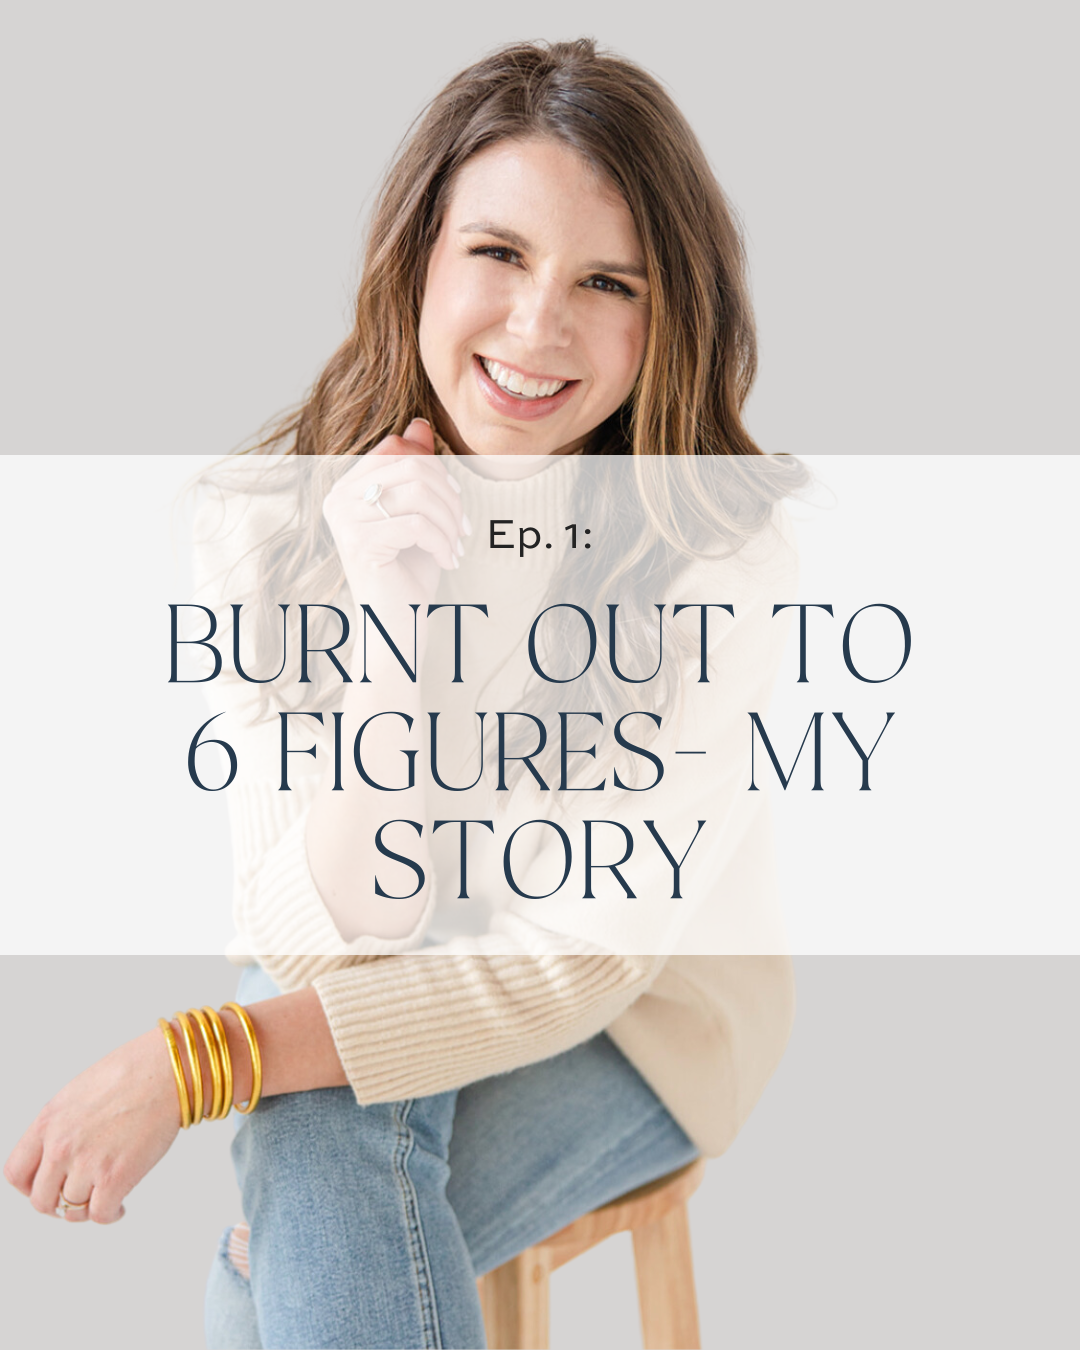 BURNT OUT TO 6 FIGURES- MY STORY